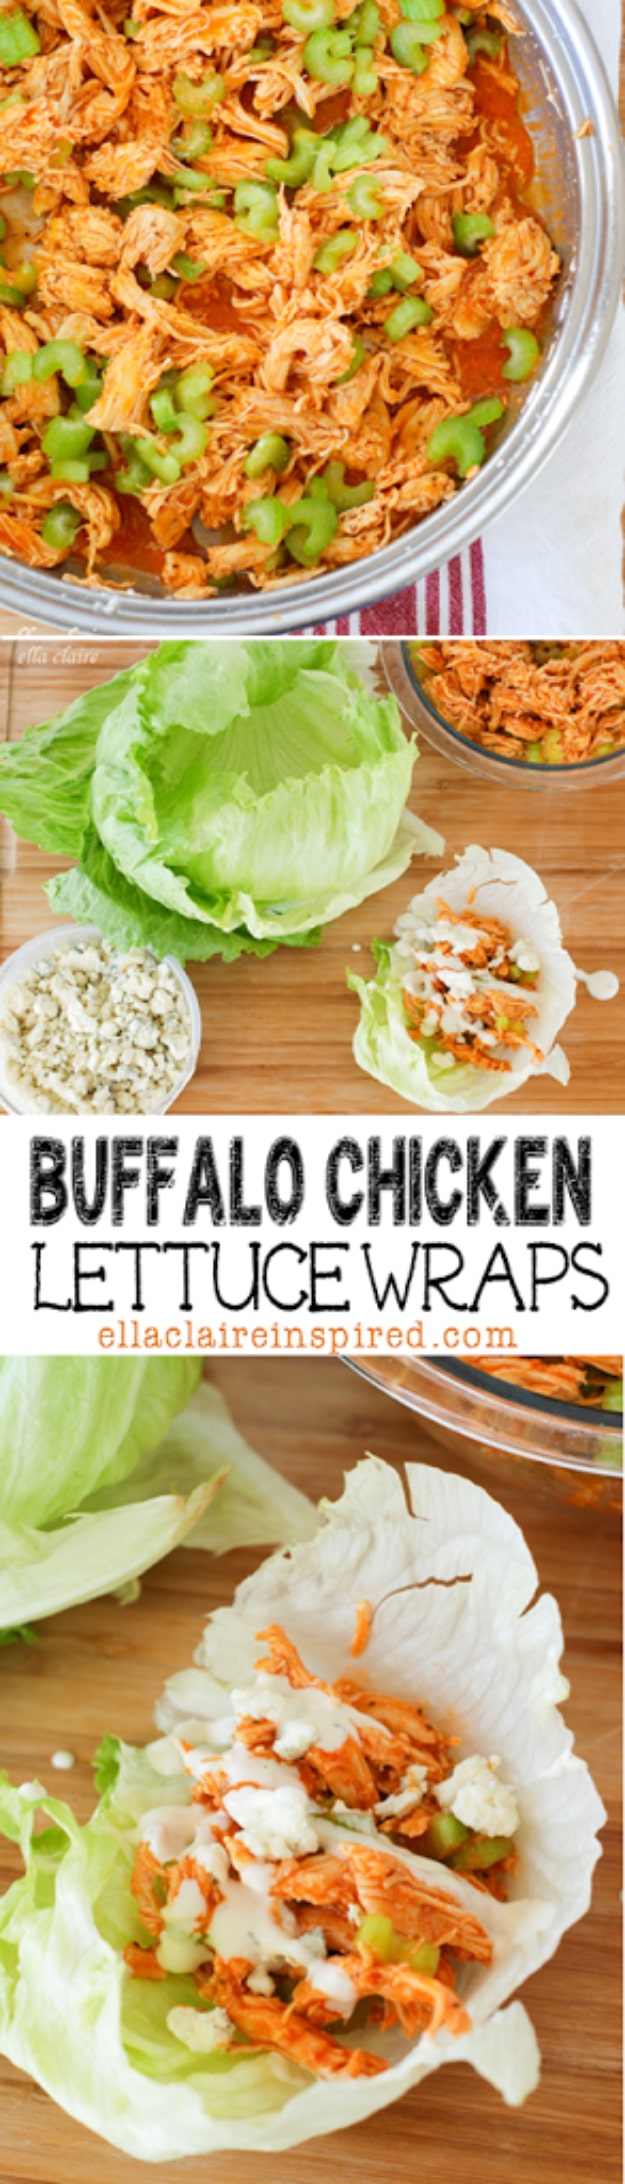 Healthy Lunch Ideas for Work - Buffalo Chicken Lettuce Wraps - Quick and Easy Recipes You Can Pack for Lunches at the Office - Lowfat and Simple Ideas for Eating on the Job - Microwave, No Heat, Mason Jar Salads, Sandwiches, Wraps, Soups and Bowls 